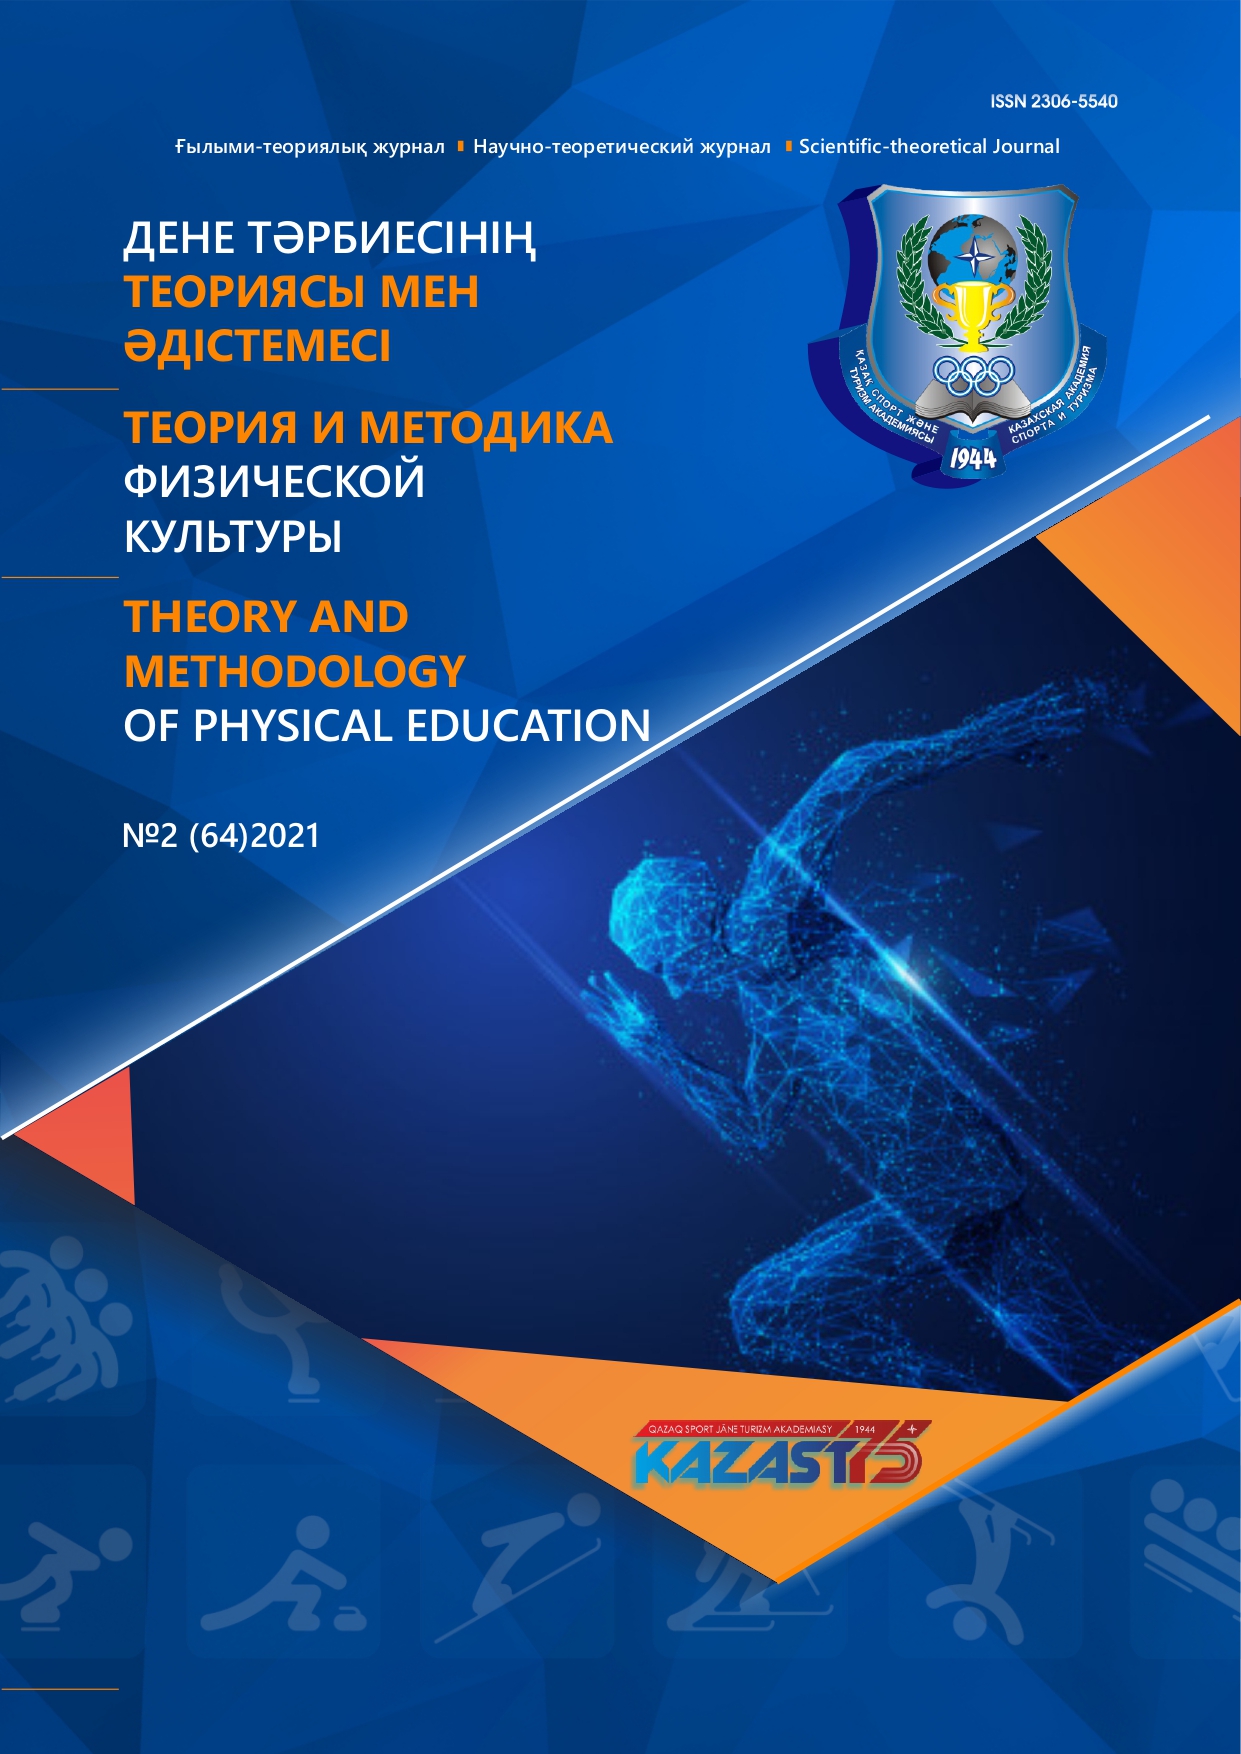 THEORY AND METHODOLOGY OF PHYSICAL EDUCATION